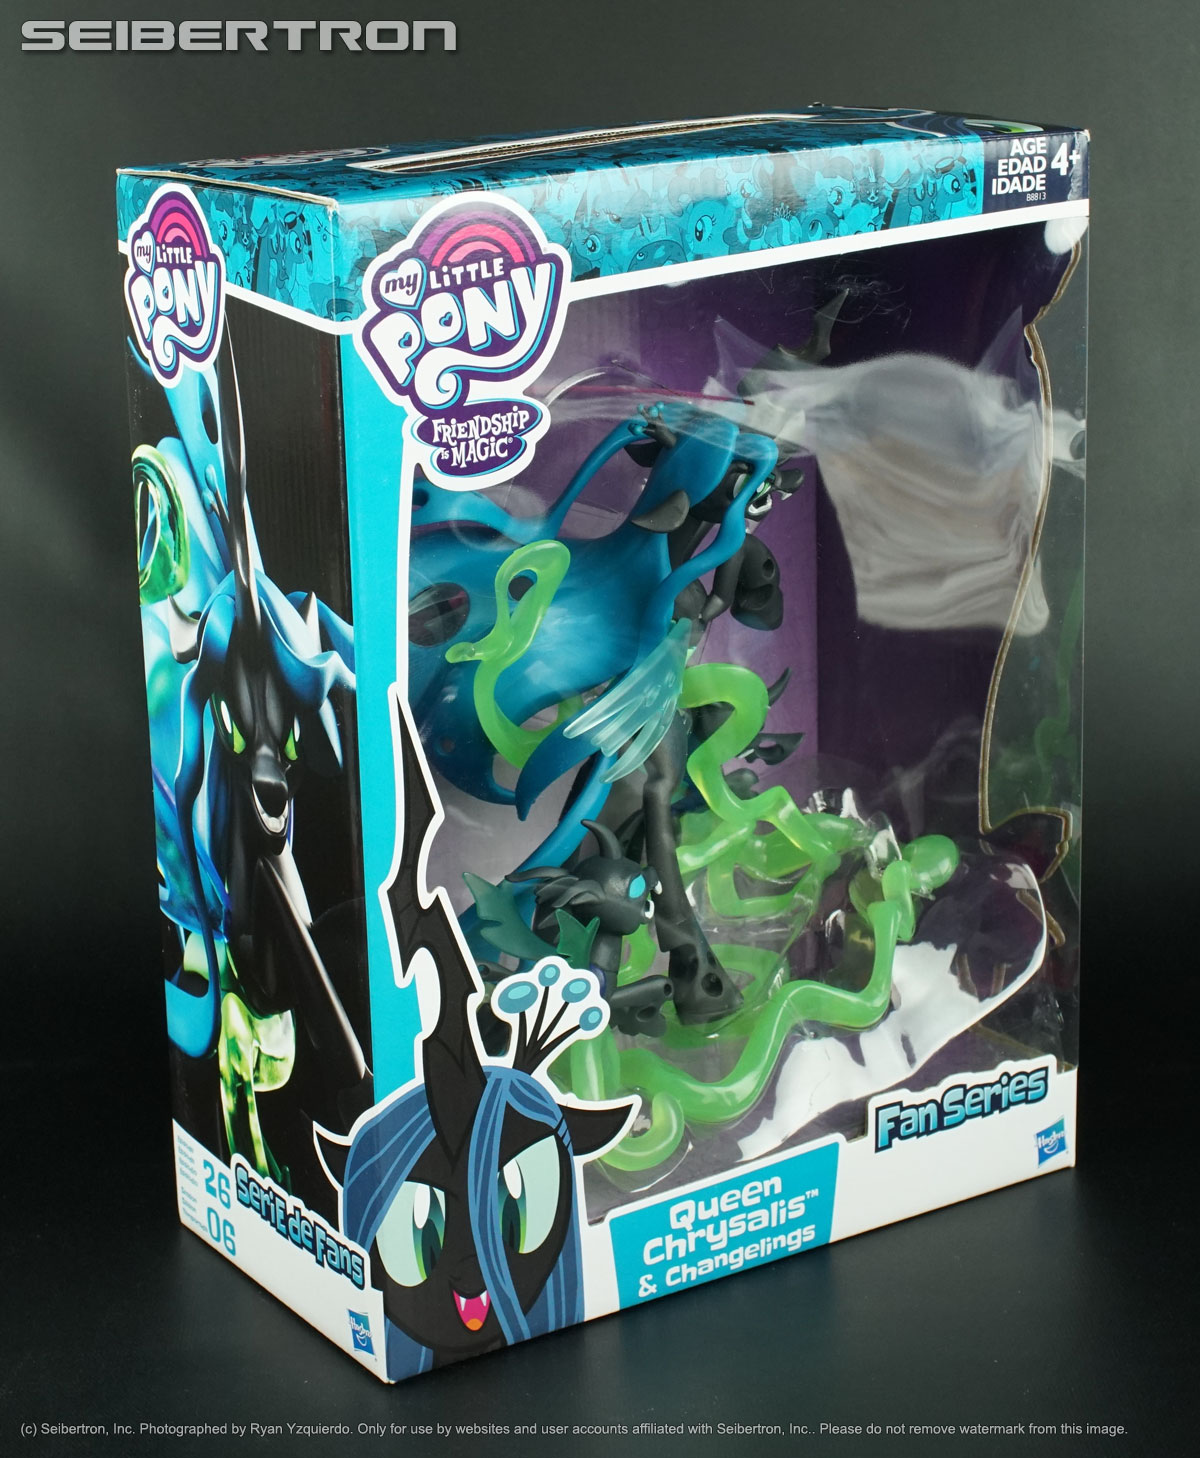 Transformers, Gobots, Masters of the Universe, Teenage Mutant Ninja Turtles, Shopkins, Comic Books, and other items items listings from Seibertron.com: QUEEN CHRYSALIS & CHANGELINGS My Little Pony Friendship is Magic Fan Series New